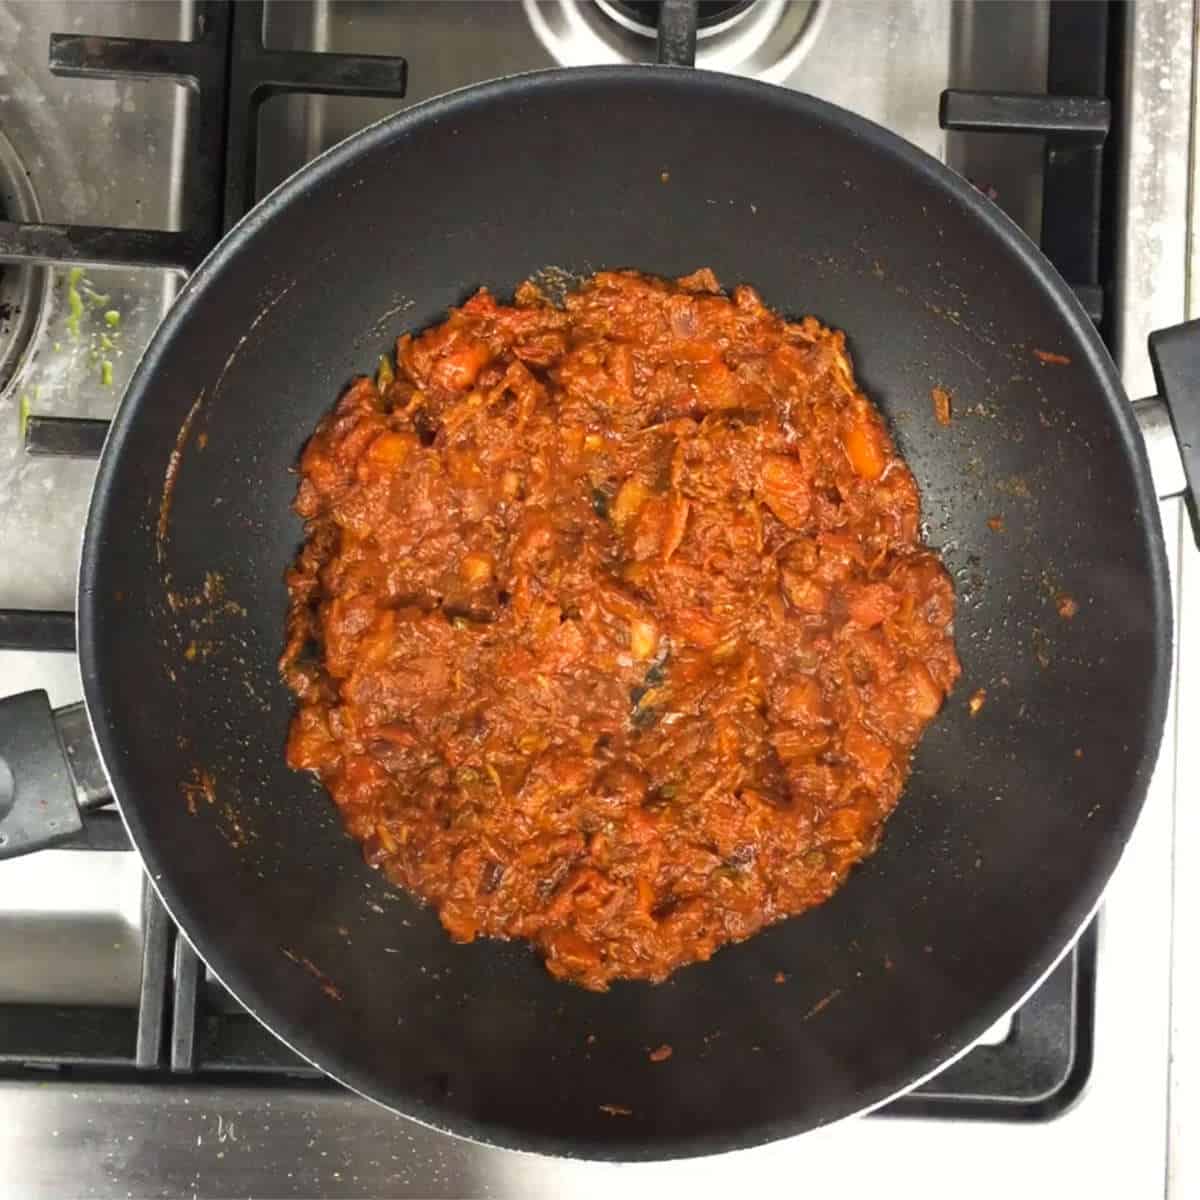 Cook the tomatoes and spices well.